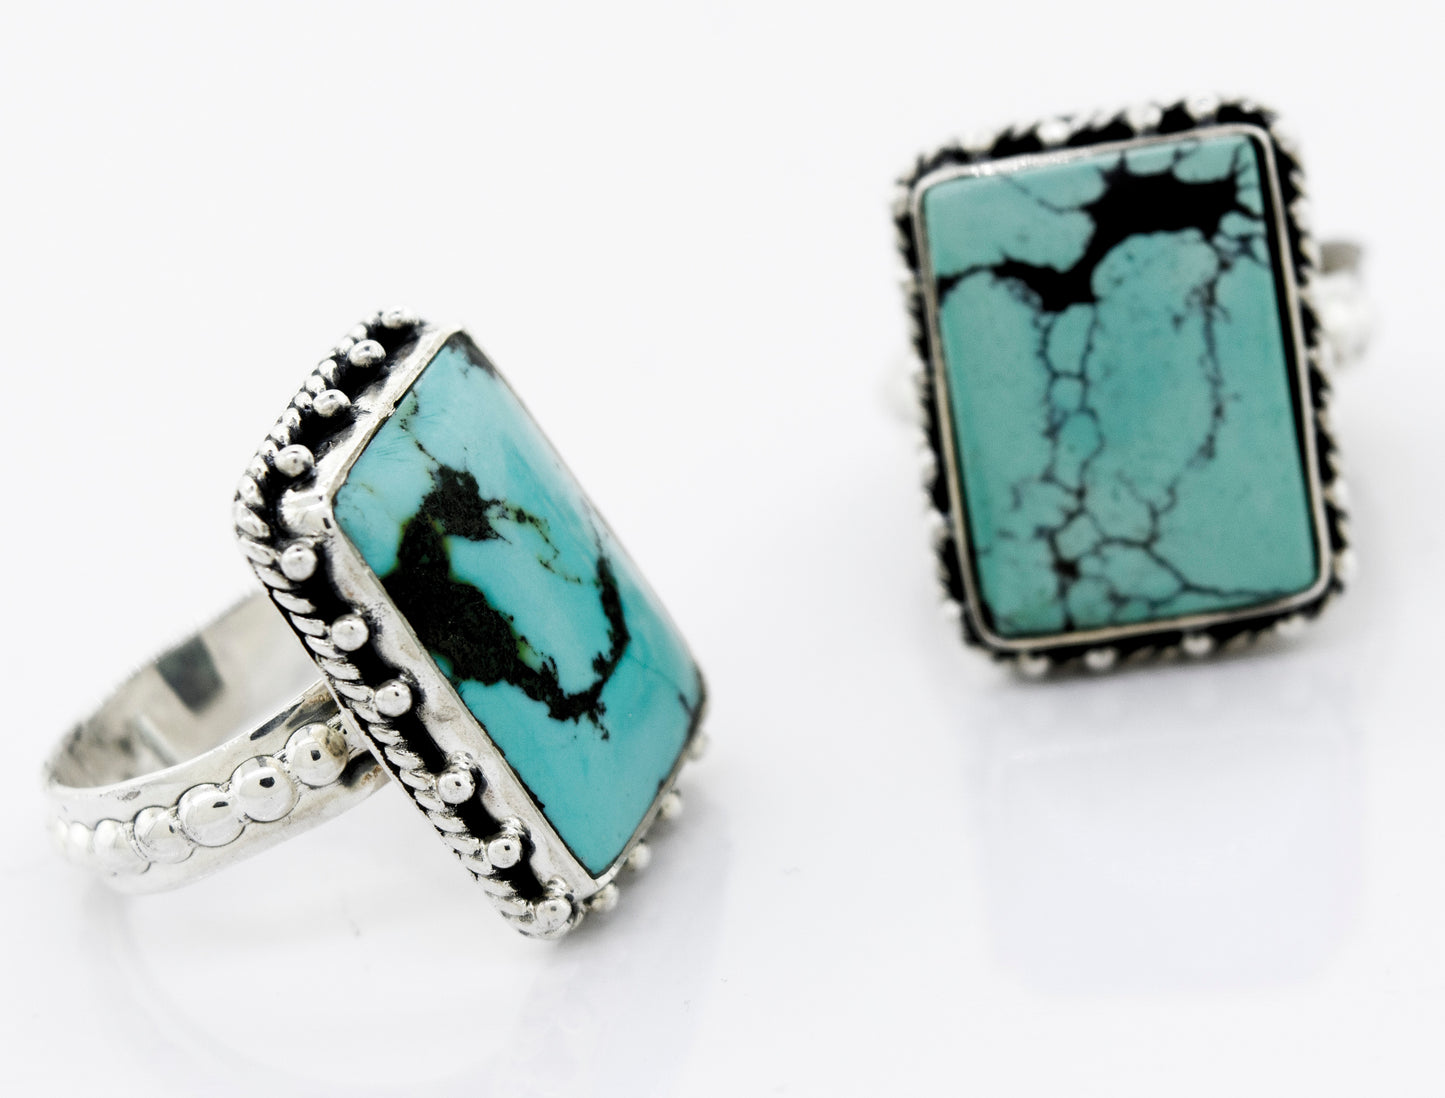 A pair of Rectangular Shape Natural Turquoise Rings with sterling silver bands, branded by Super Silver, on a white surface.